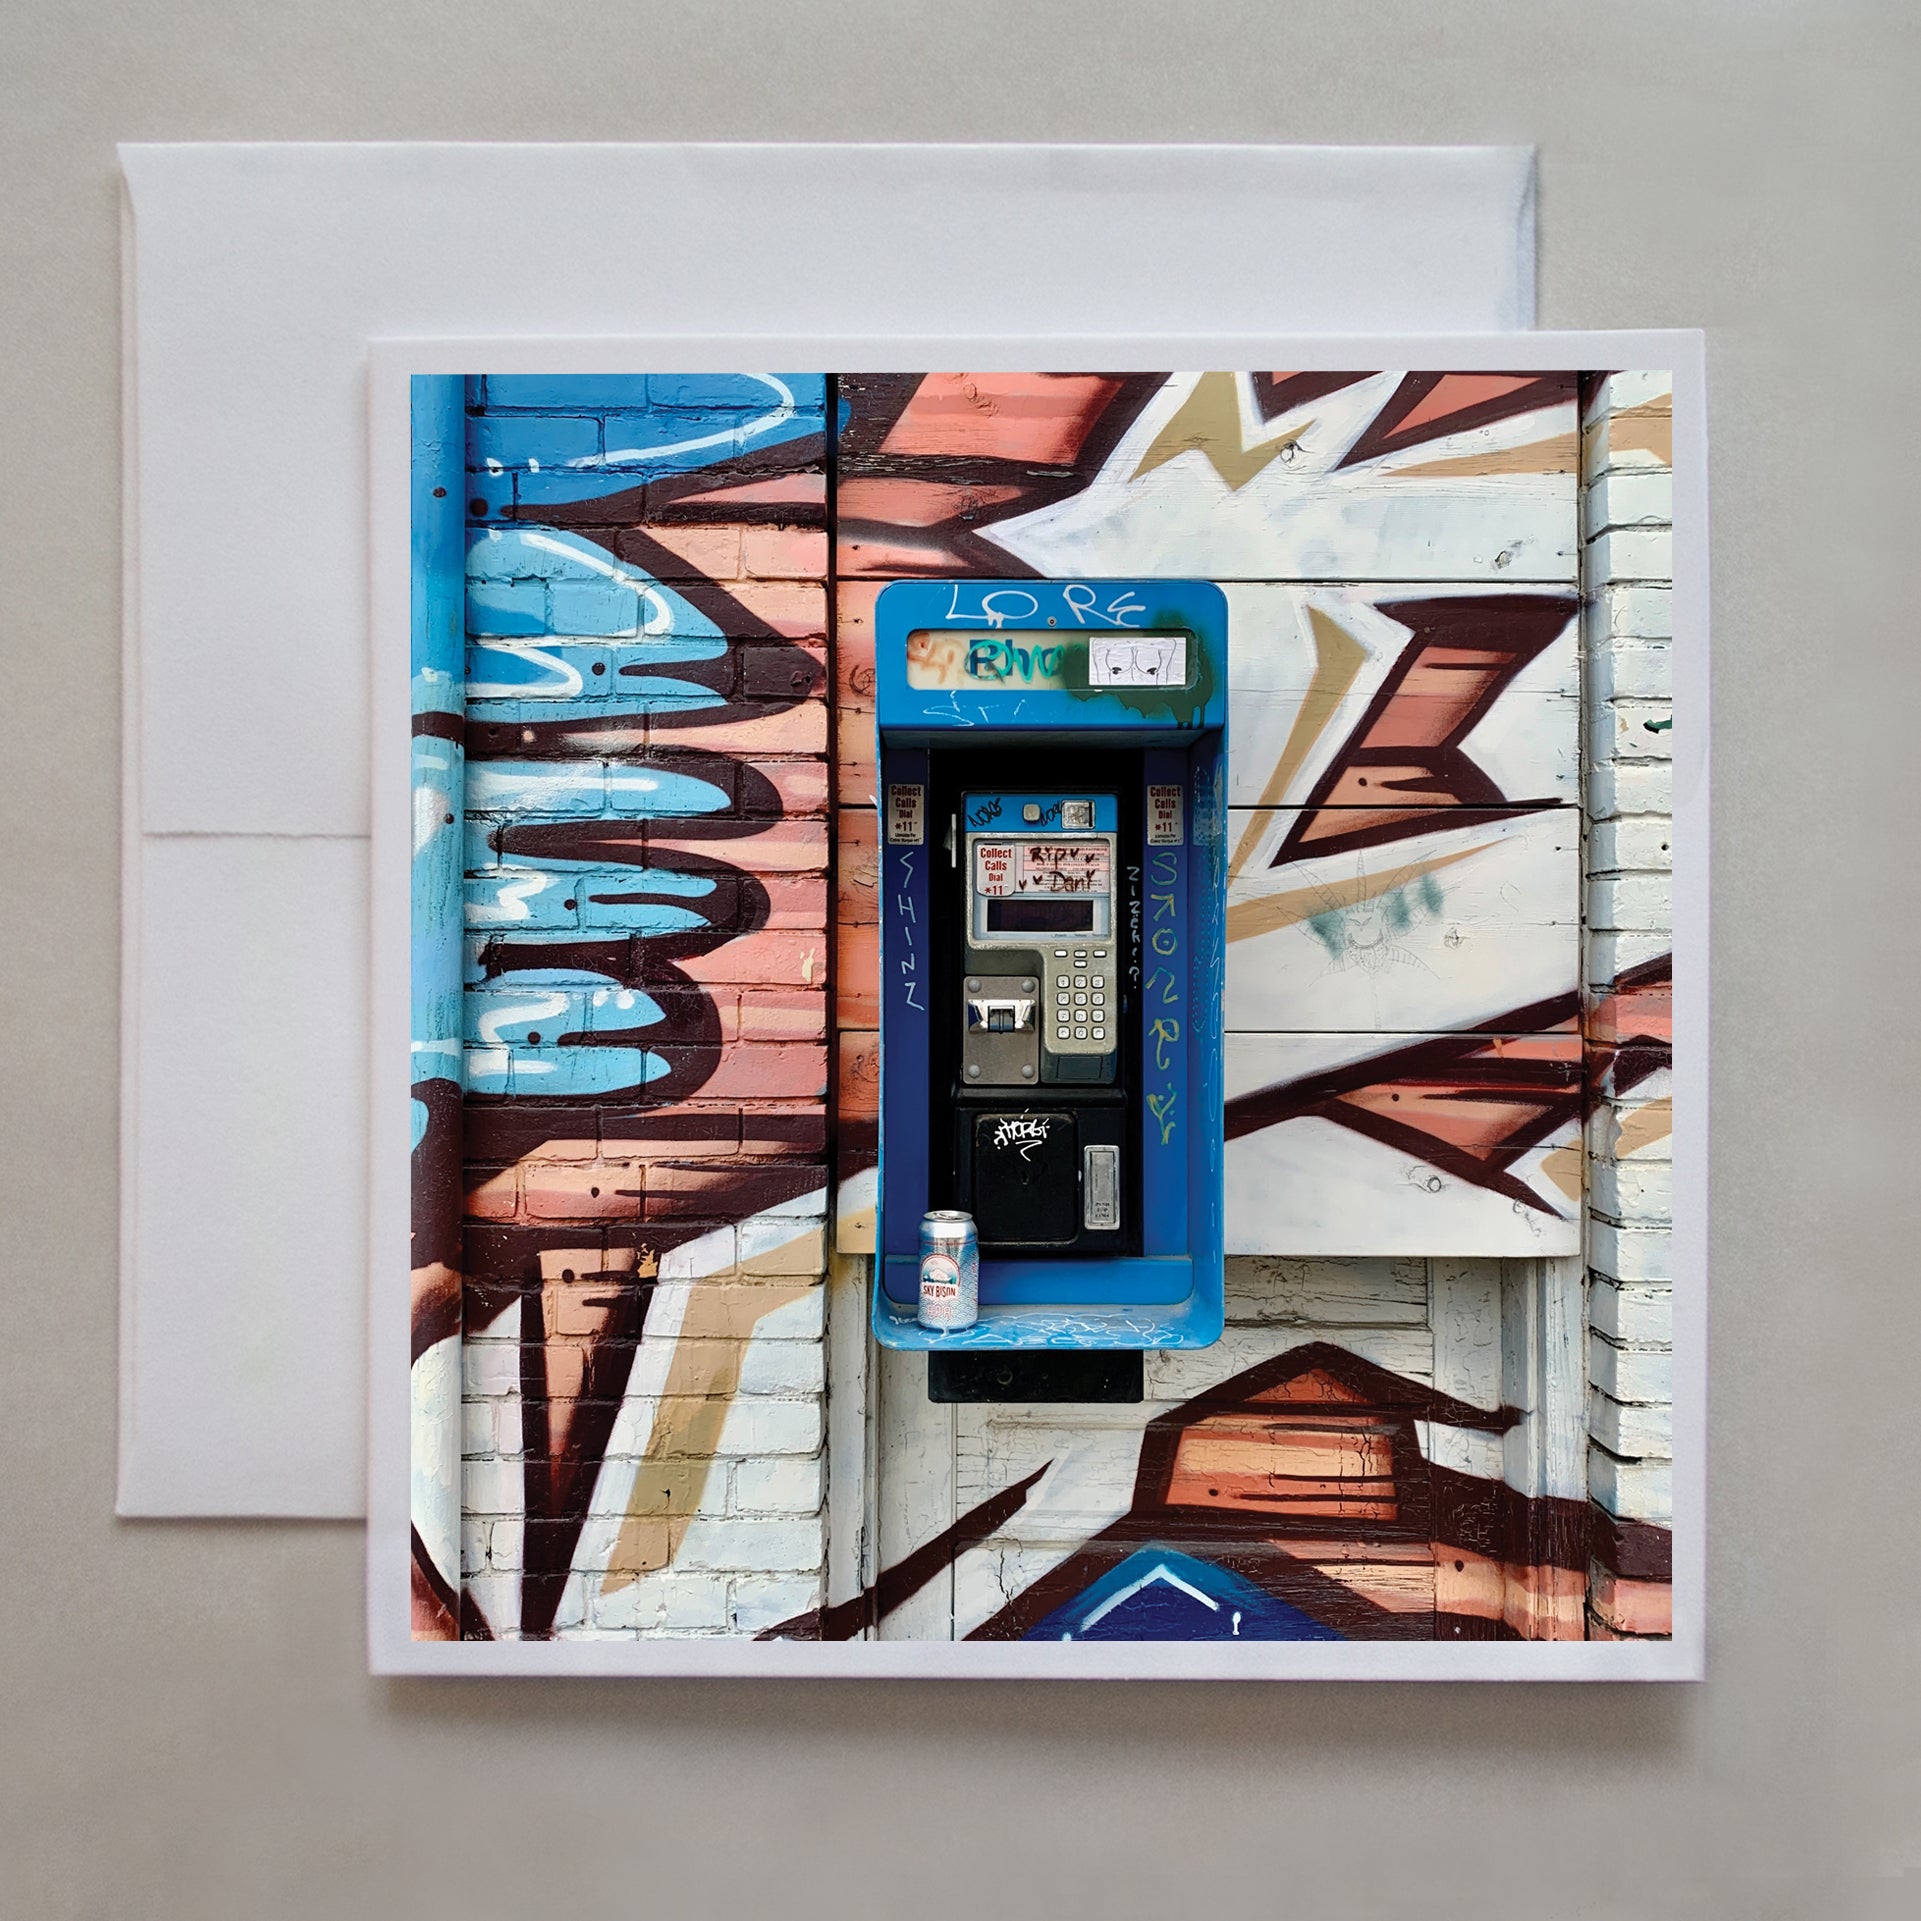 I love how the graffiti artist incorporated the broken phone booth into the design in this photo greeting card by photographer Caley Taylor.